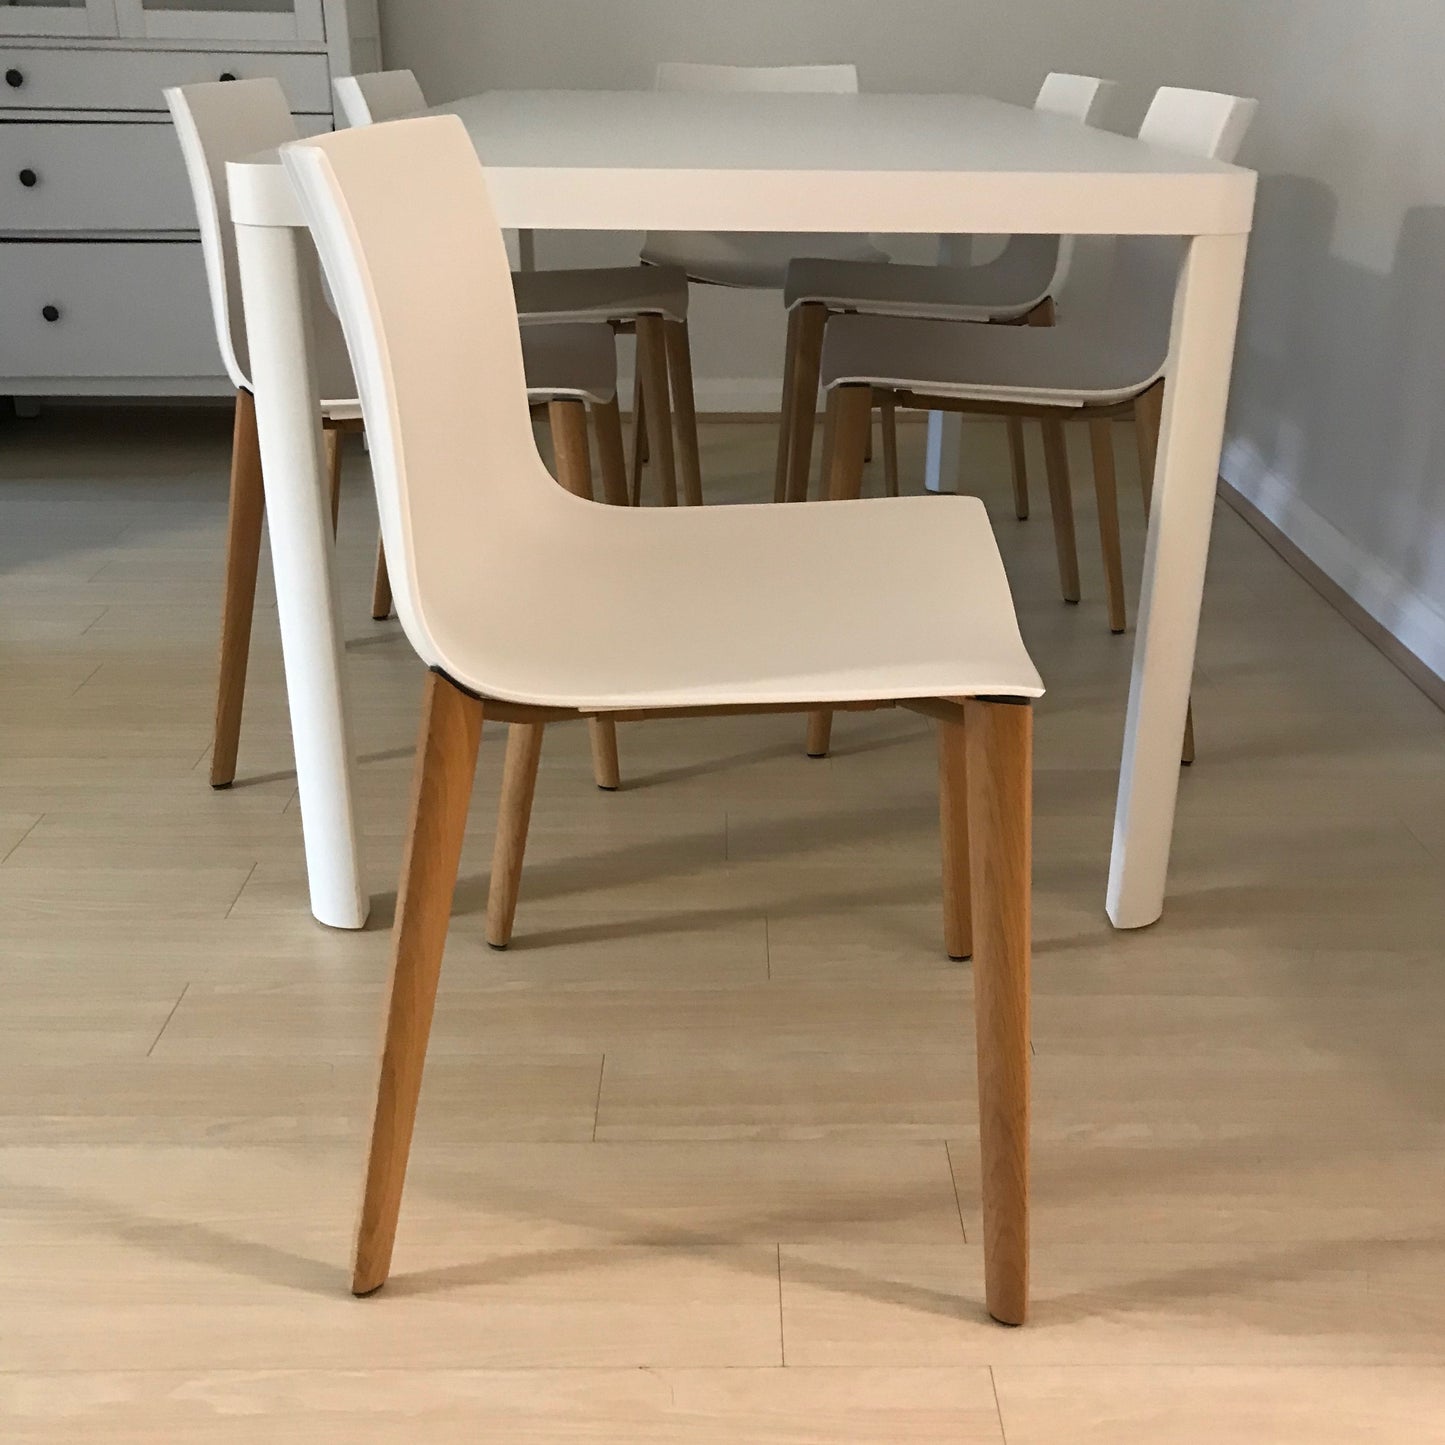 Set of SIX Catifa 46 Dining Chairs by Arper through Stylecraft